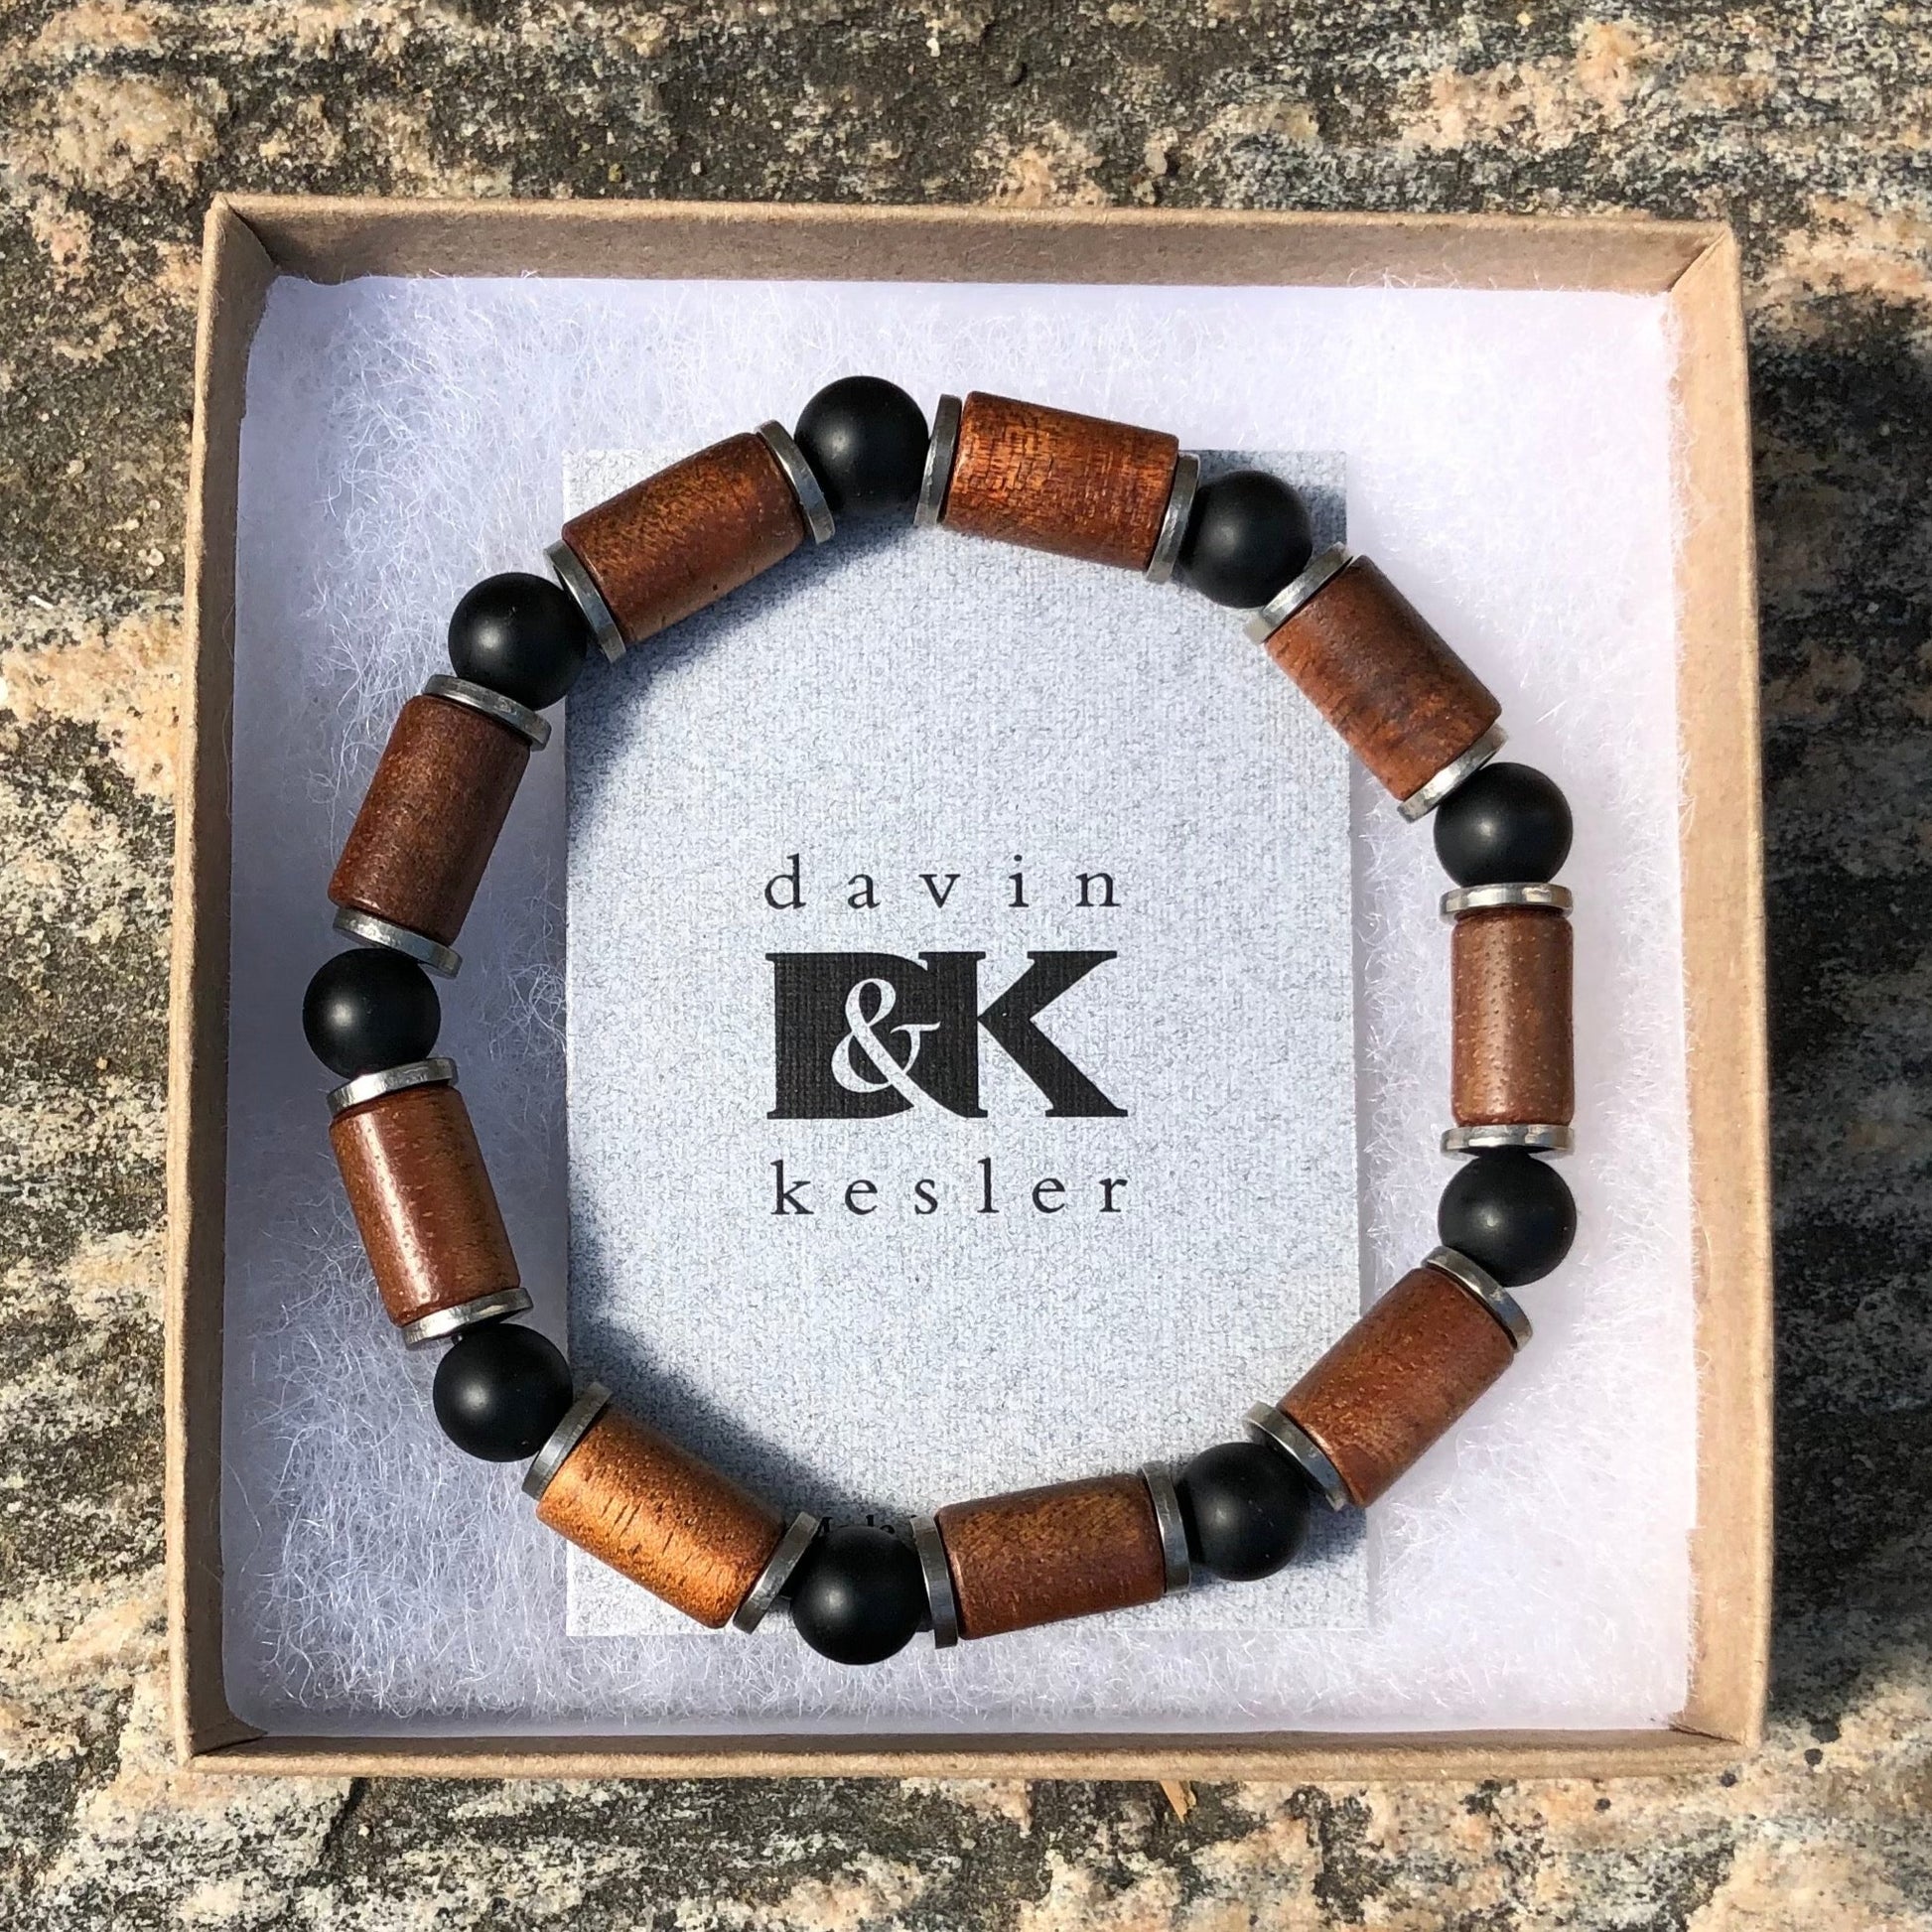 Bracelet - Wood Square Beads Cocobolo Rosewood